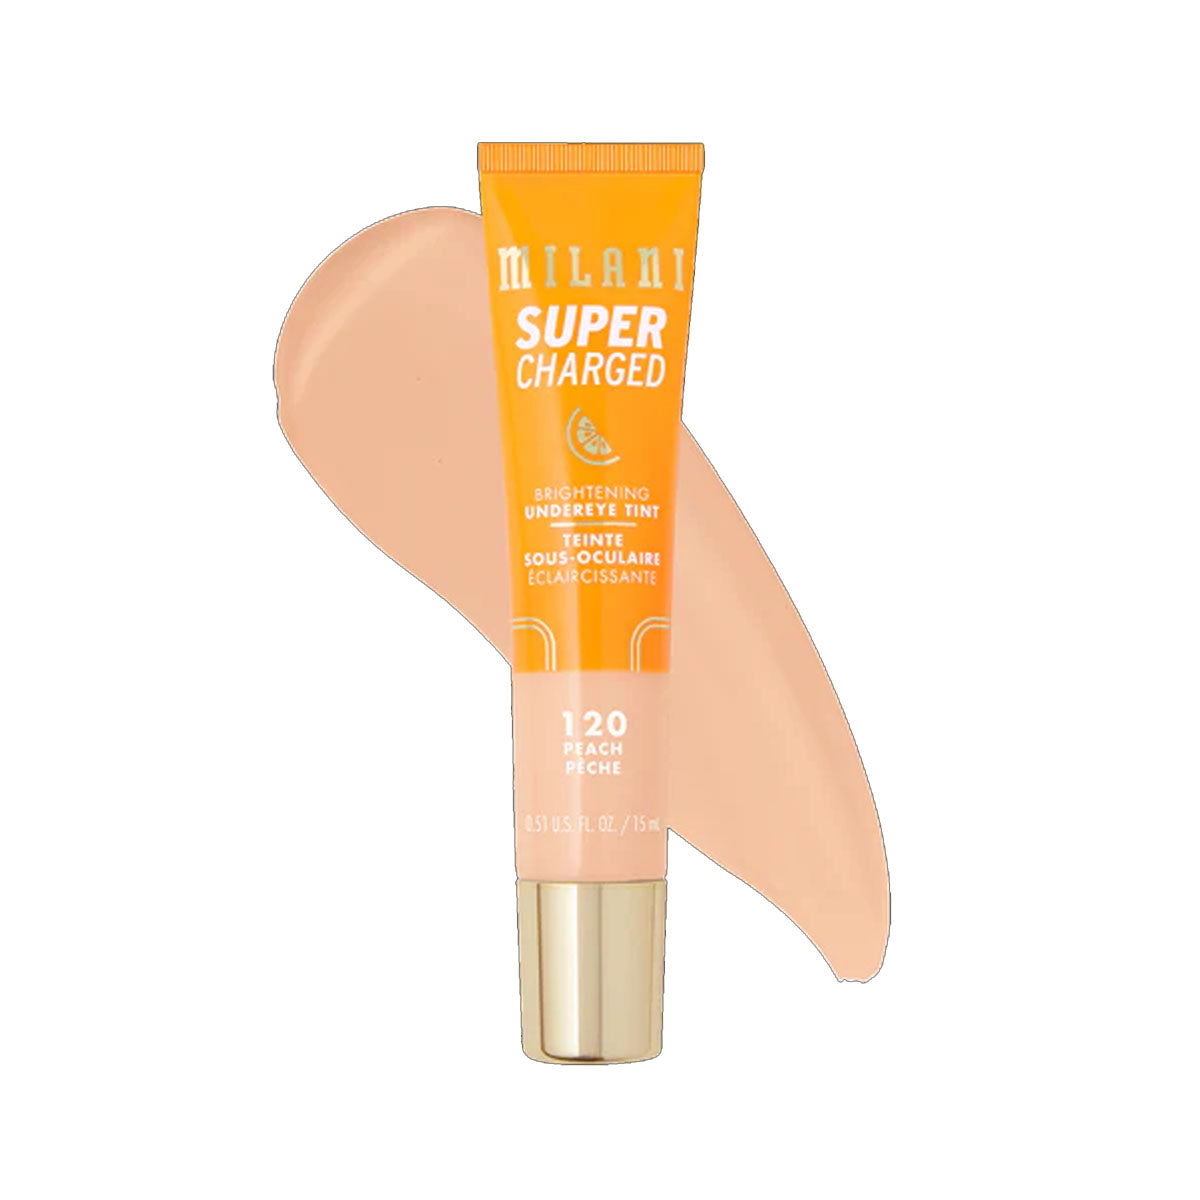 SUPERCHARGED BRIGHTENING UNDEREYE TINT - OUTLET MILANI